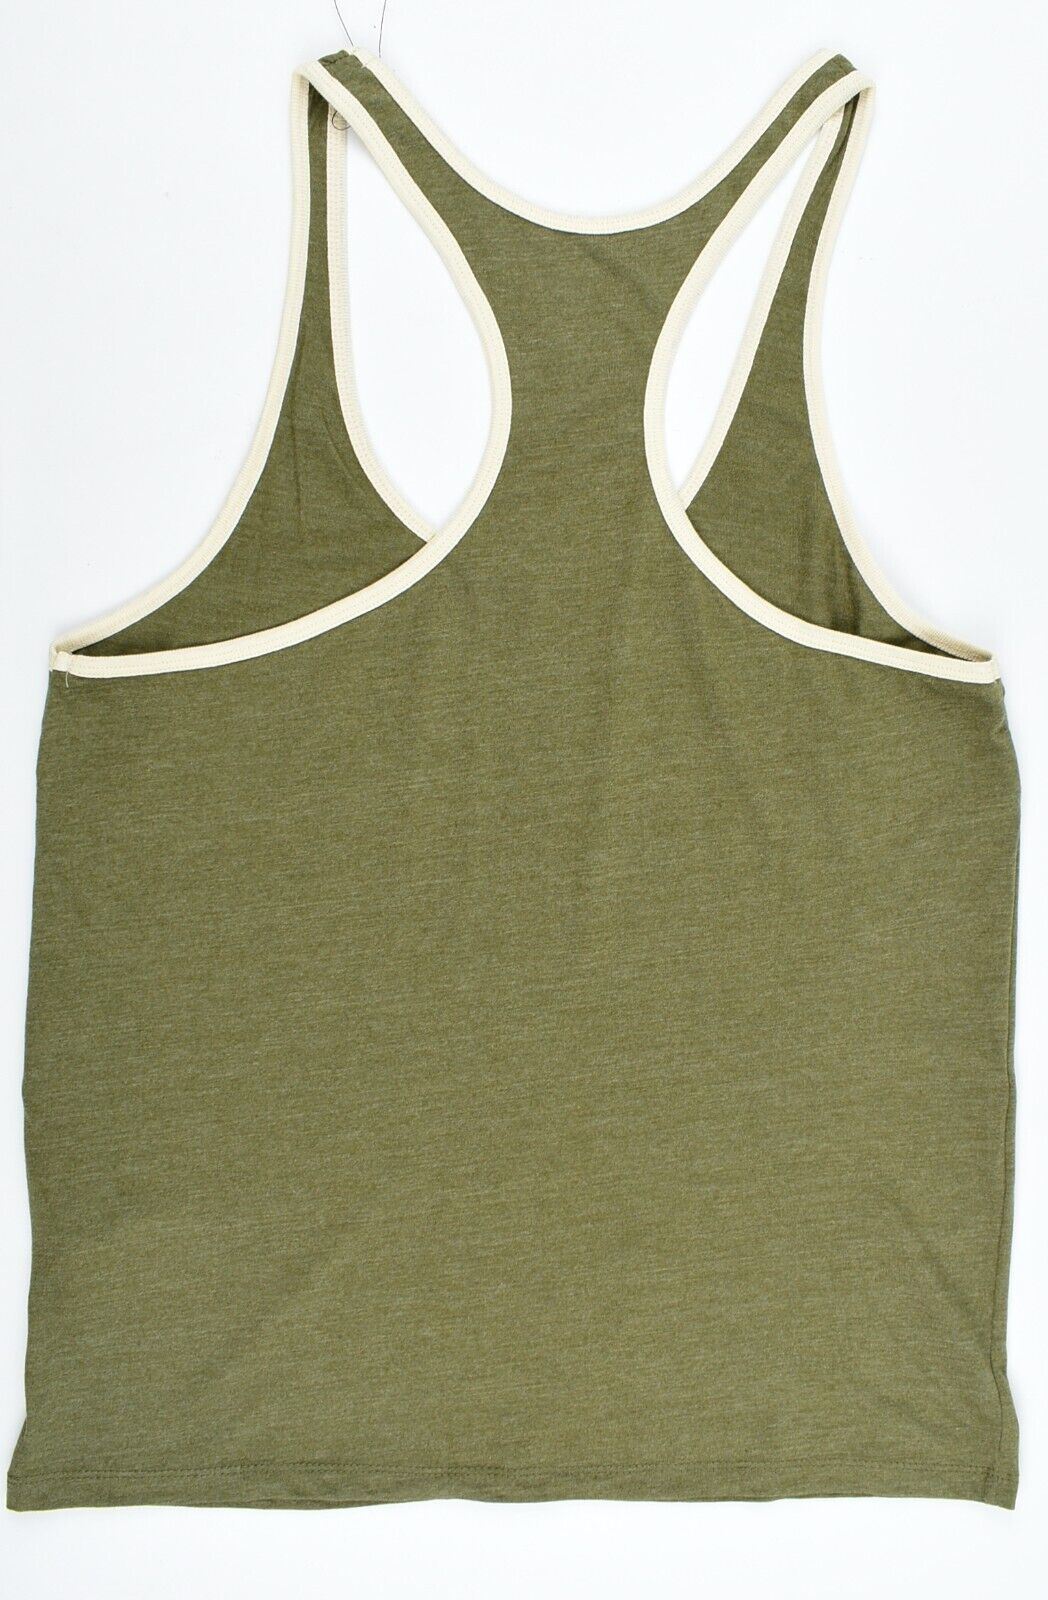 GOLD'S GYM Core Collection Men's MUSCLE JOE Vest Top, Army Green, size XL